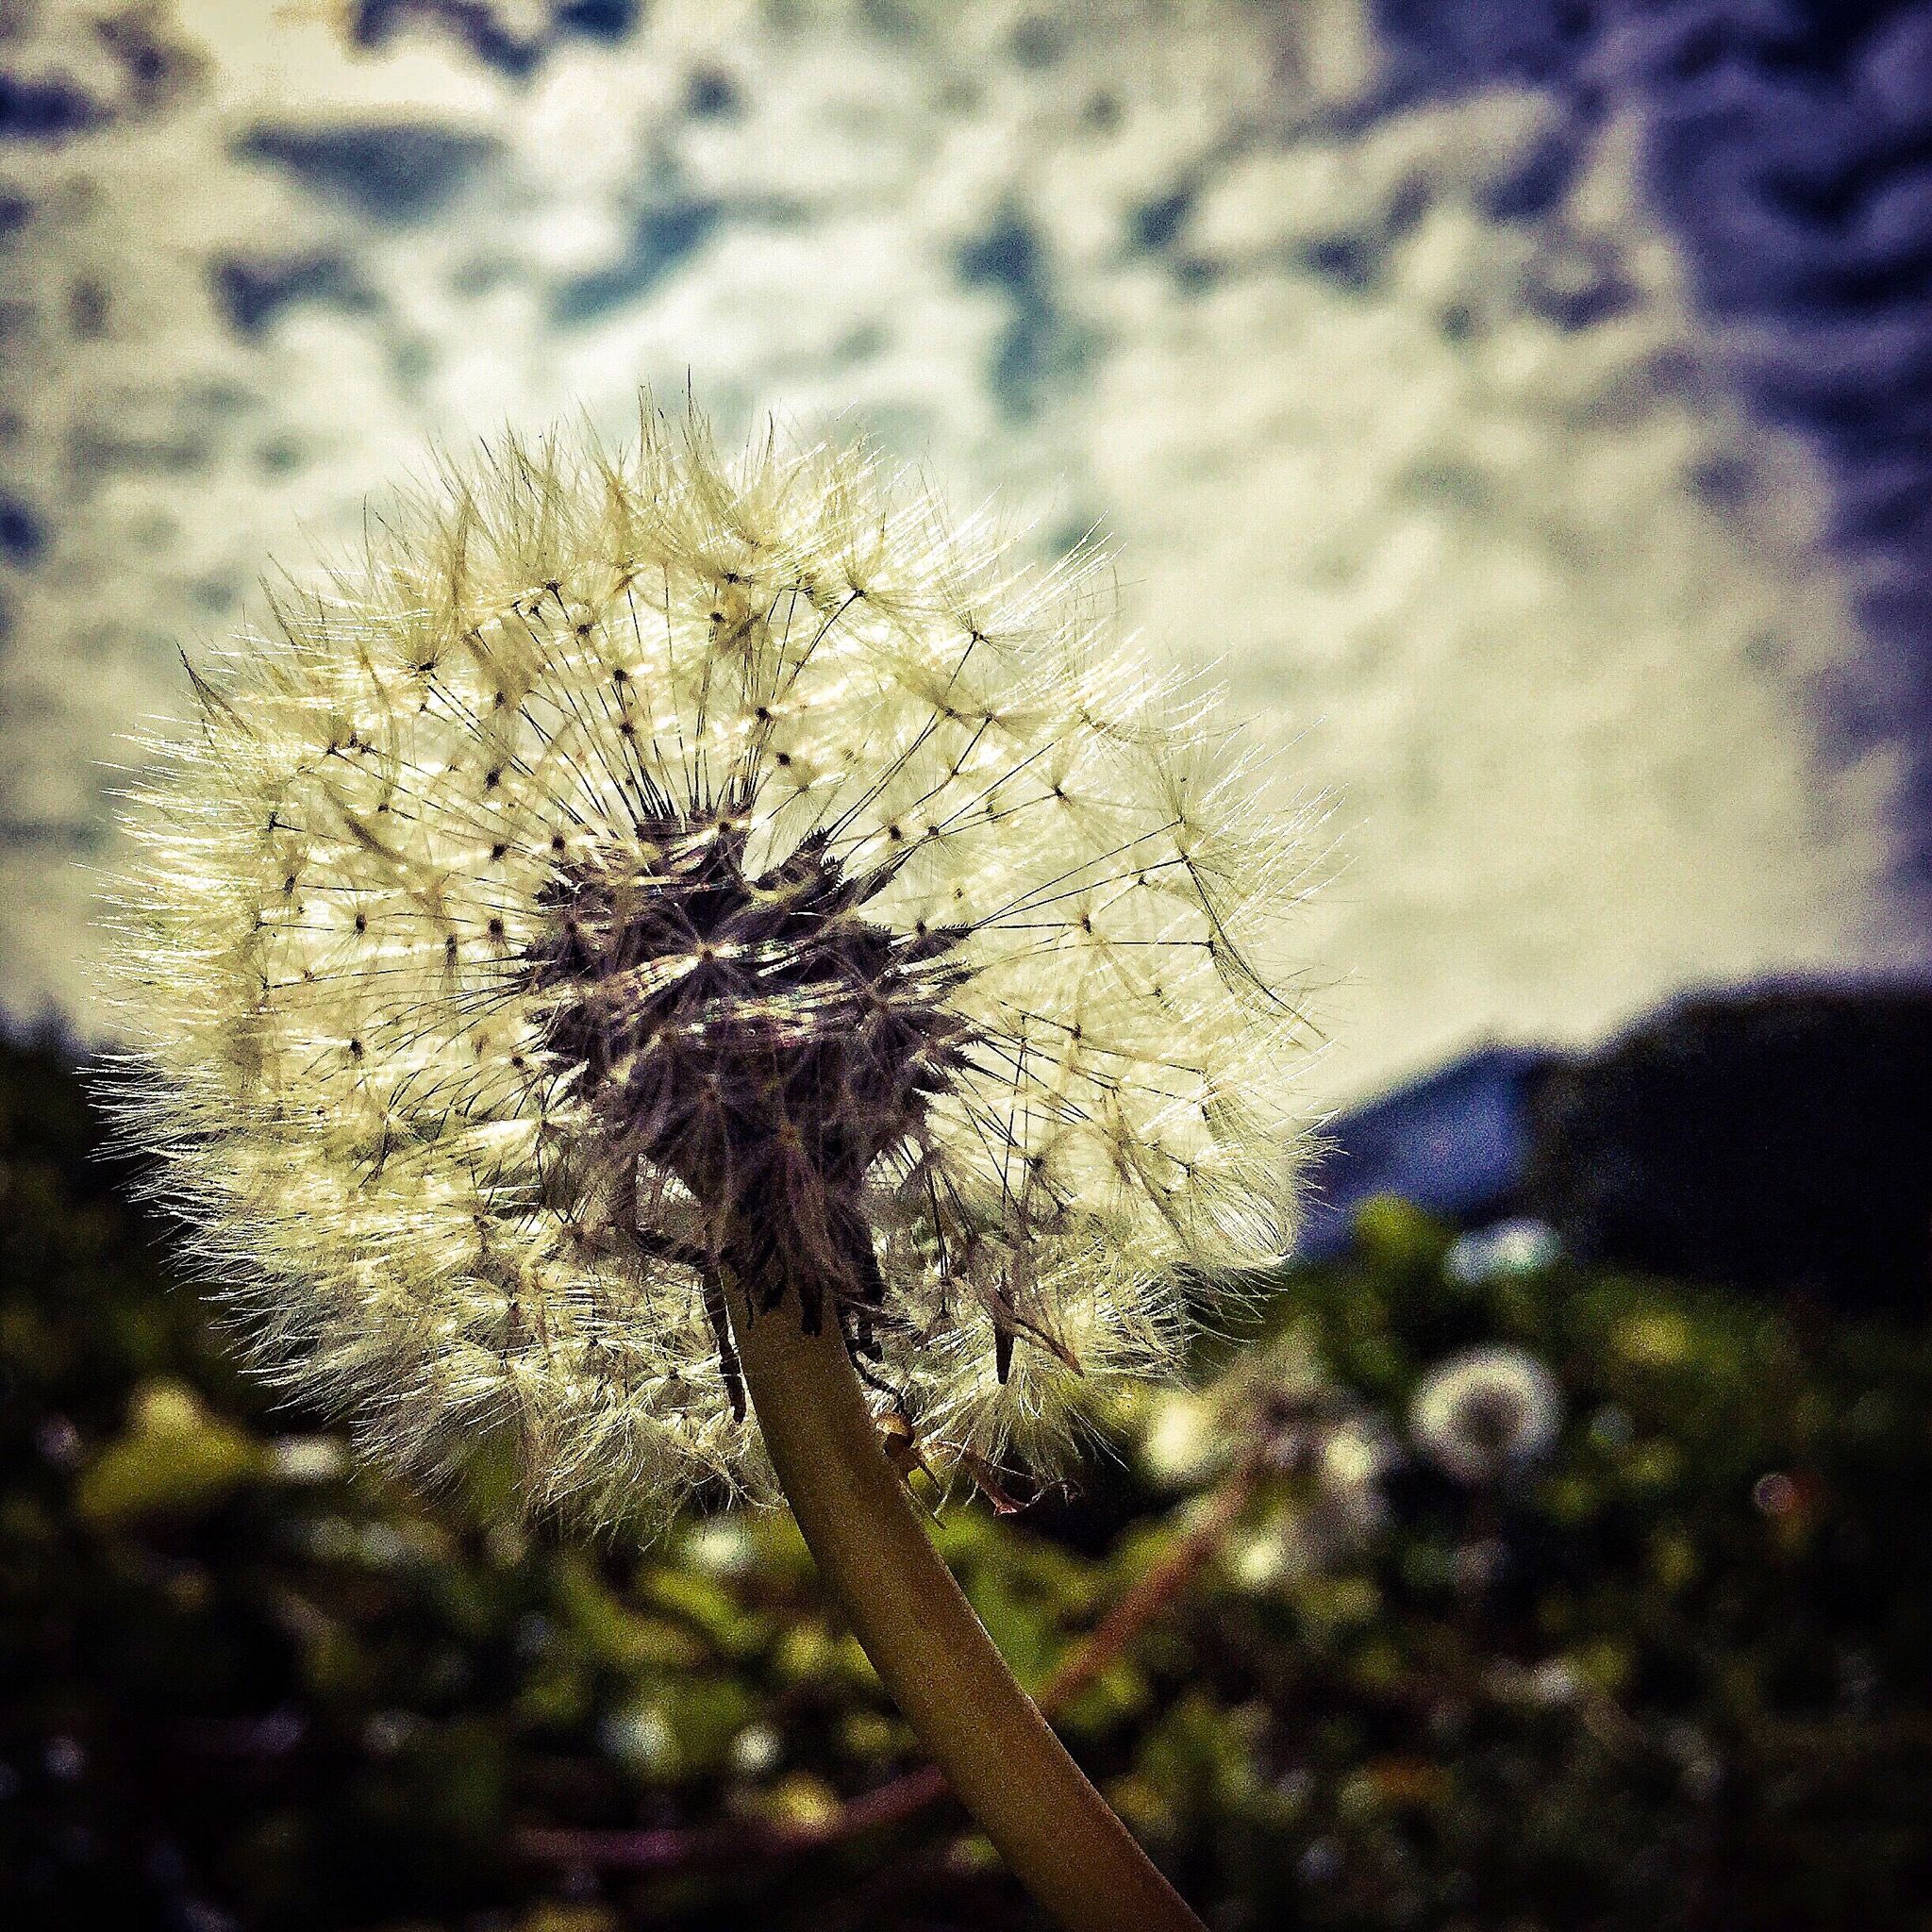 nature, growth, high angle view, close-up, beauty in nature, tranquility, outdoors, day, flower, plant, branch, tree, no people, focus on foreground, fragility, water, sunlight, dandelion, white color, field